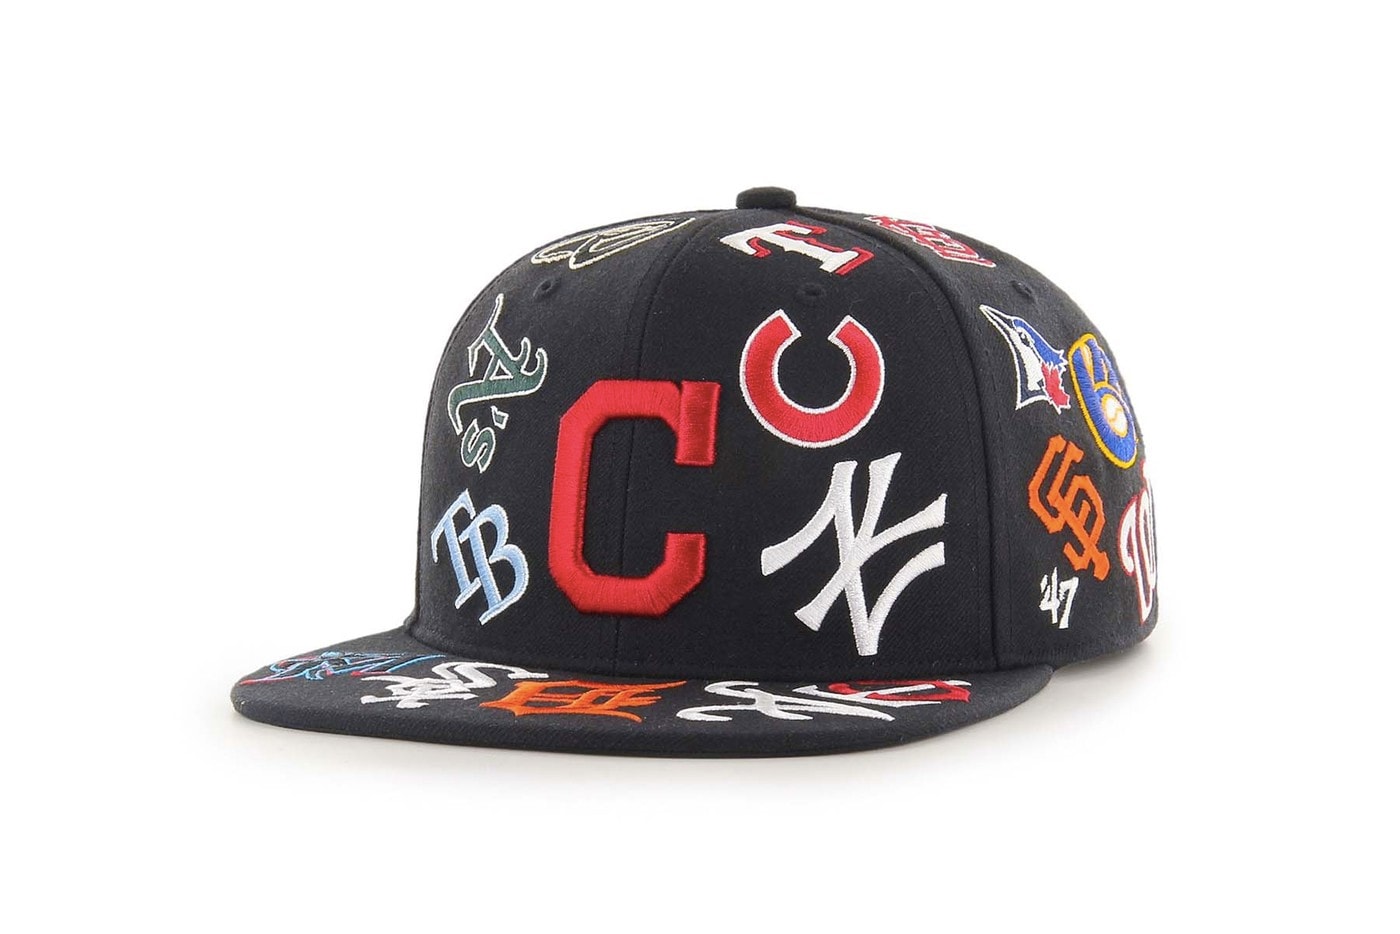 MLB x '47 2019 All Star Game Cap Release